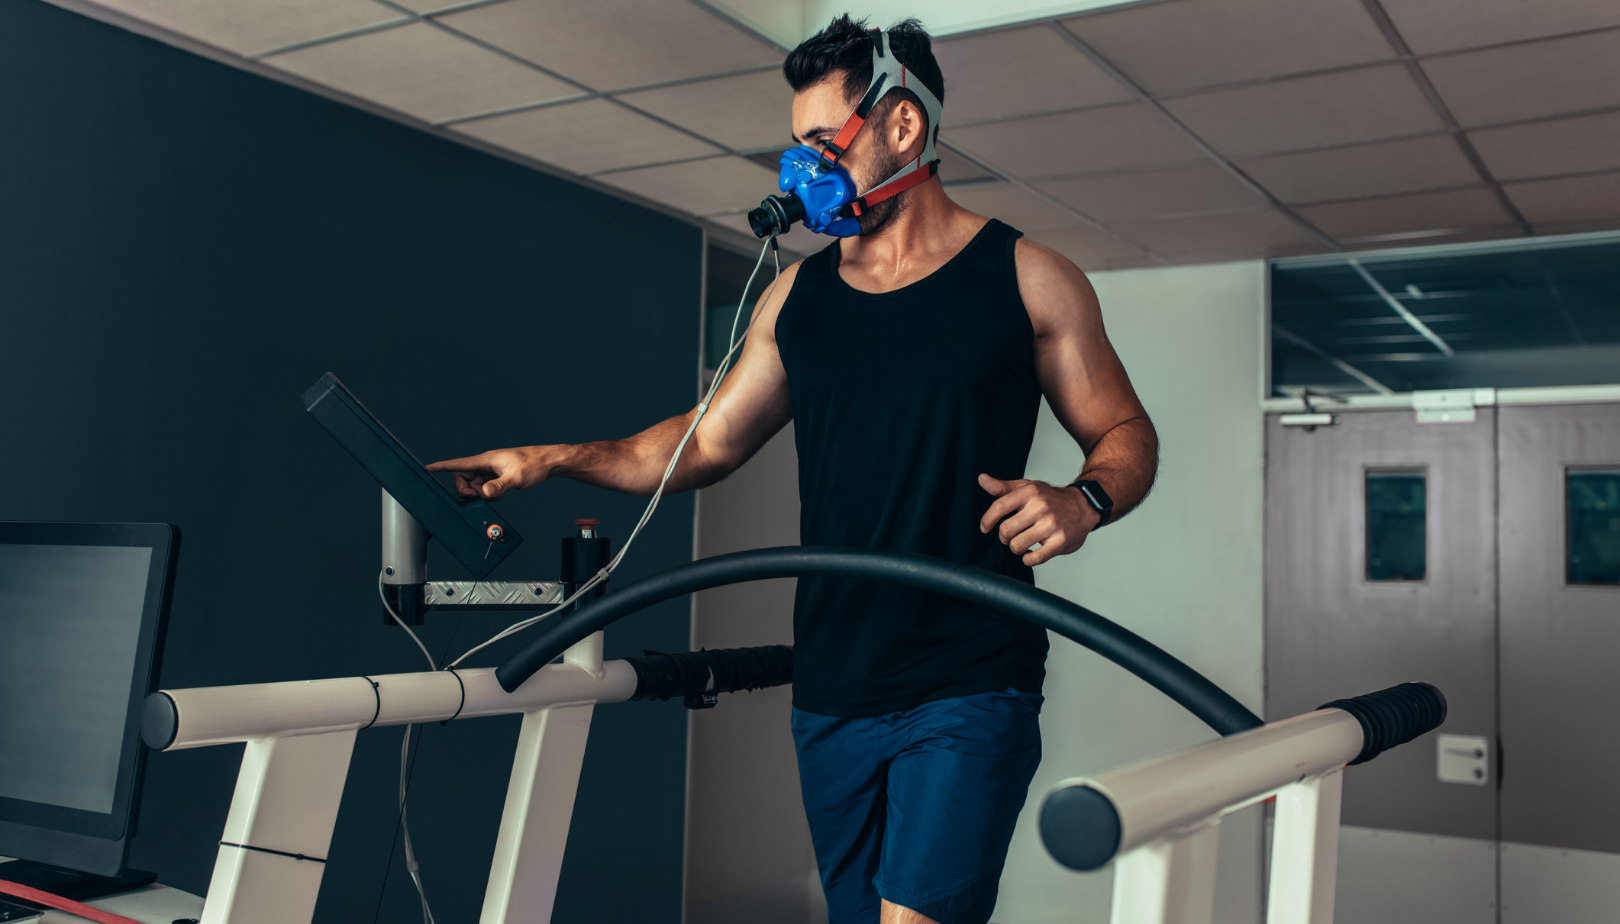 Image of a man undergoing exercise testing, wearing a face mask.